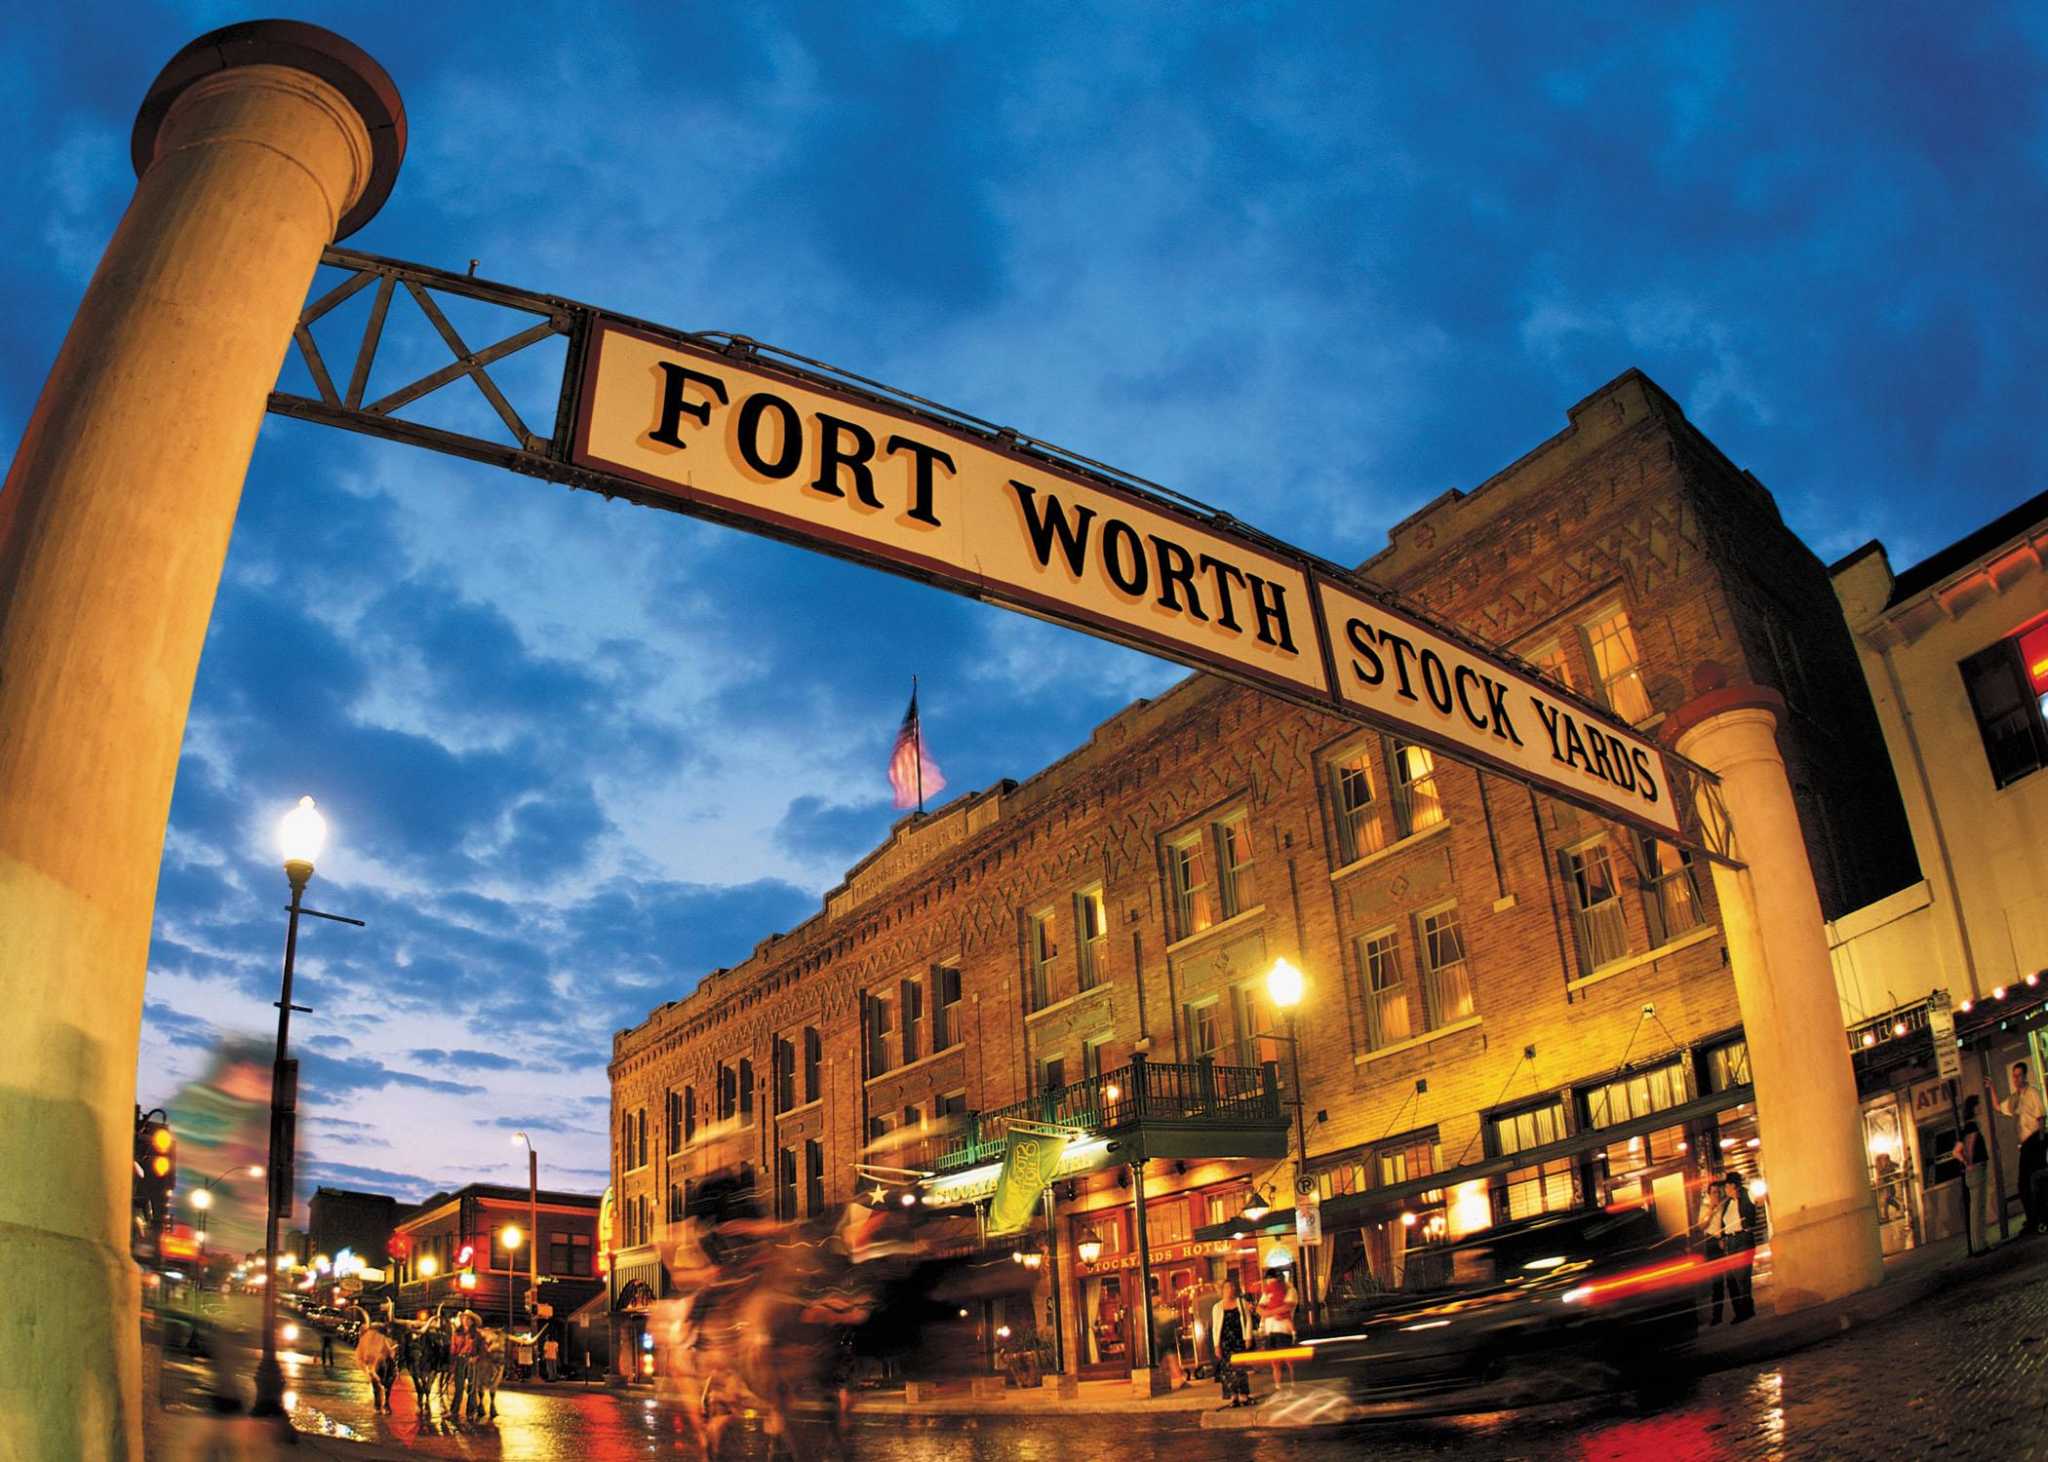 Stockyards National Historic District in Fort Worth